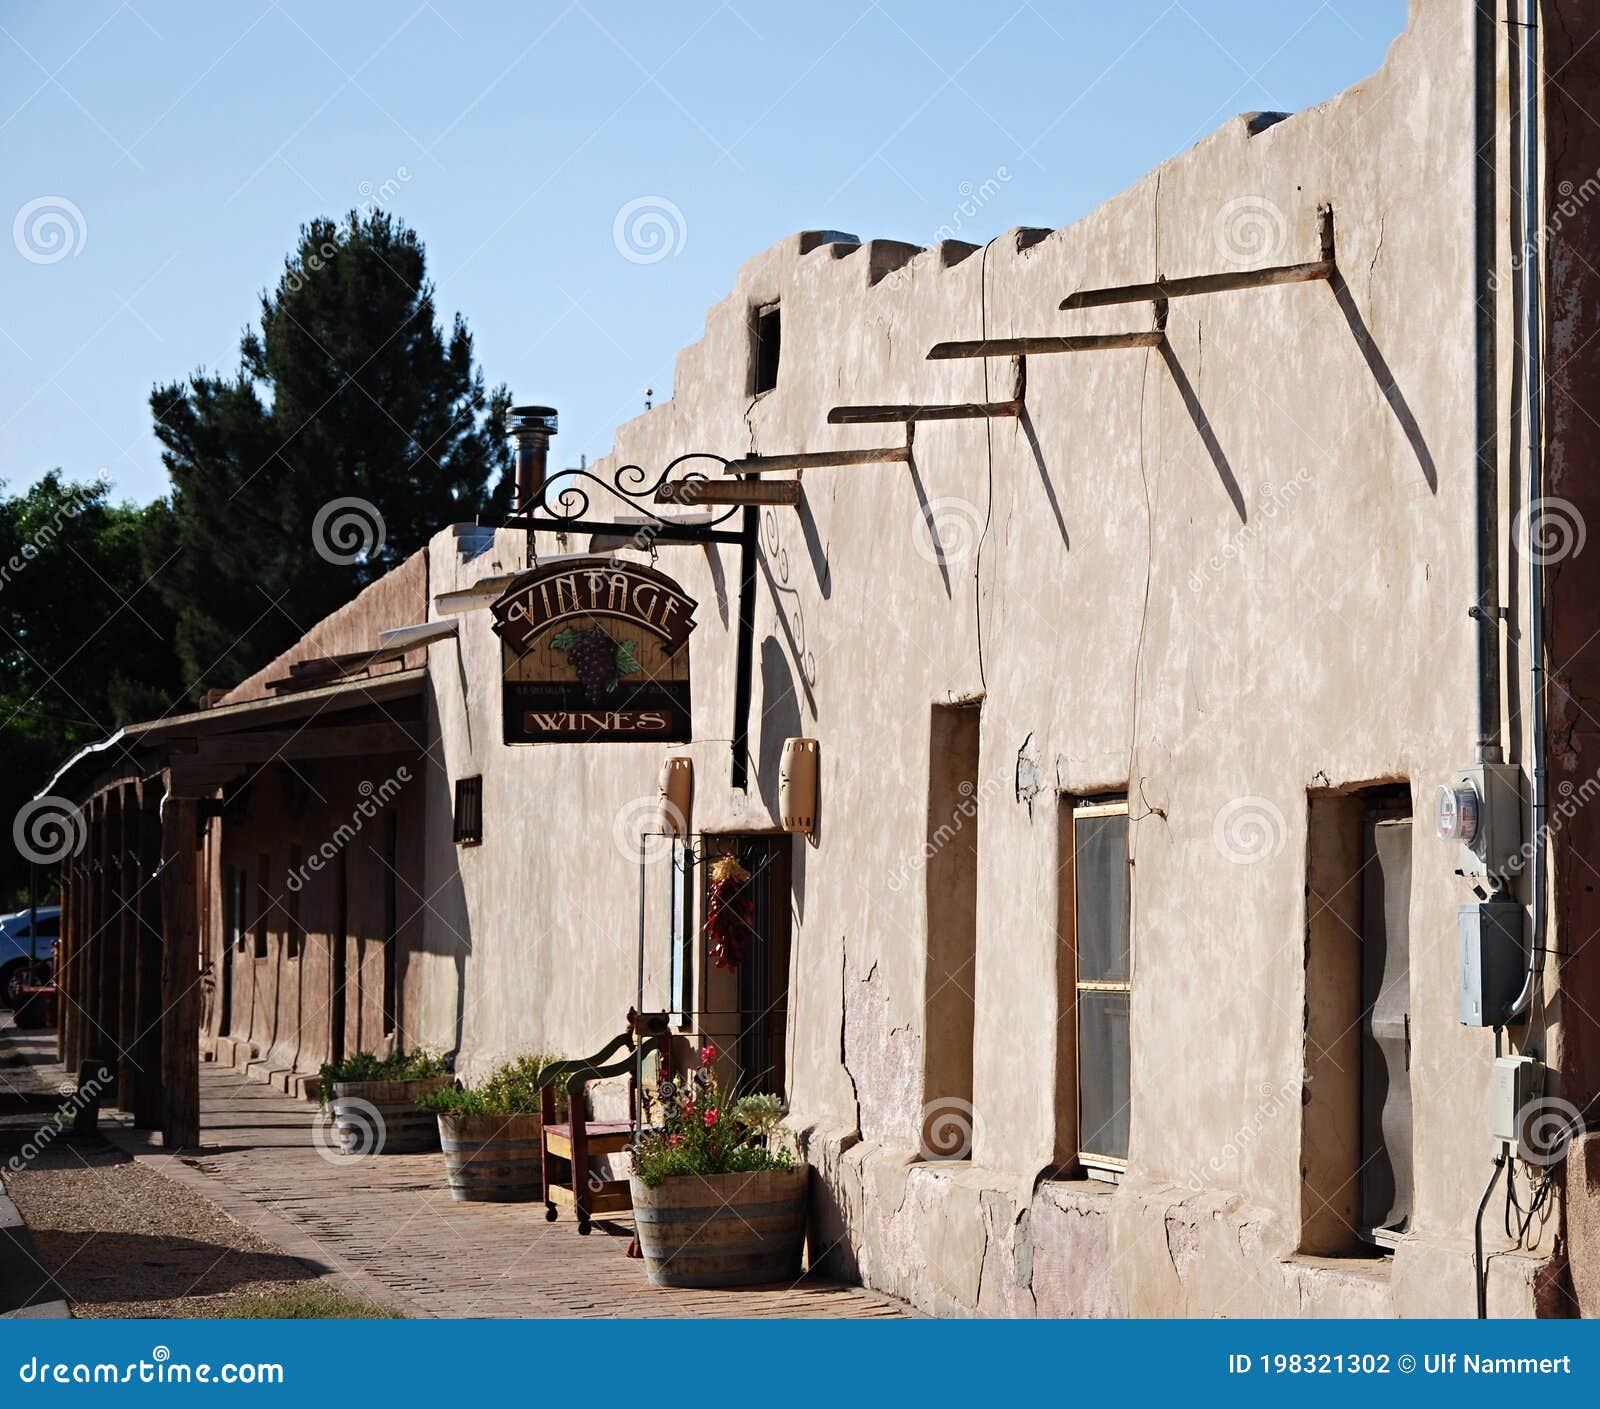 the old adobe town of mesilla, new mexico